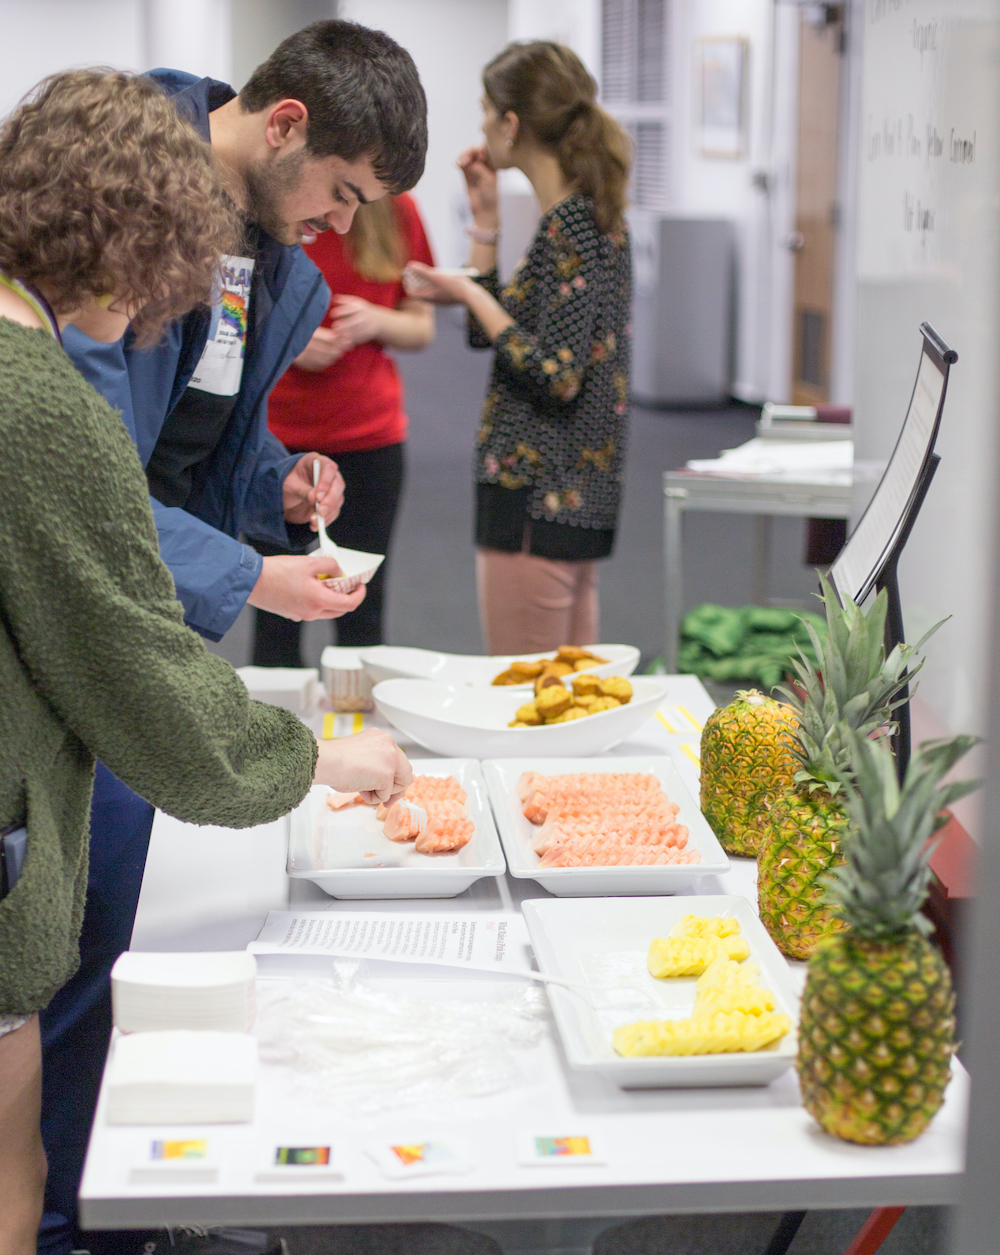 Students sample genetically modified pineapple at a Libraries "Future of Food' event